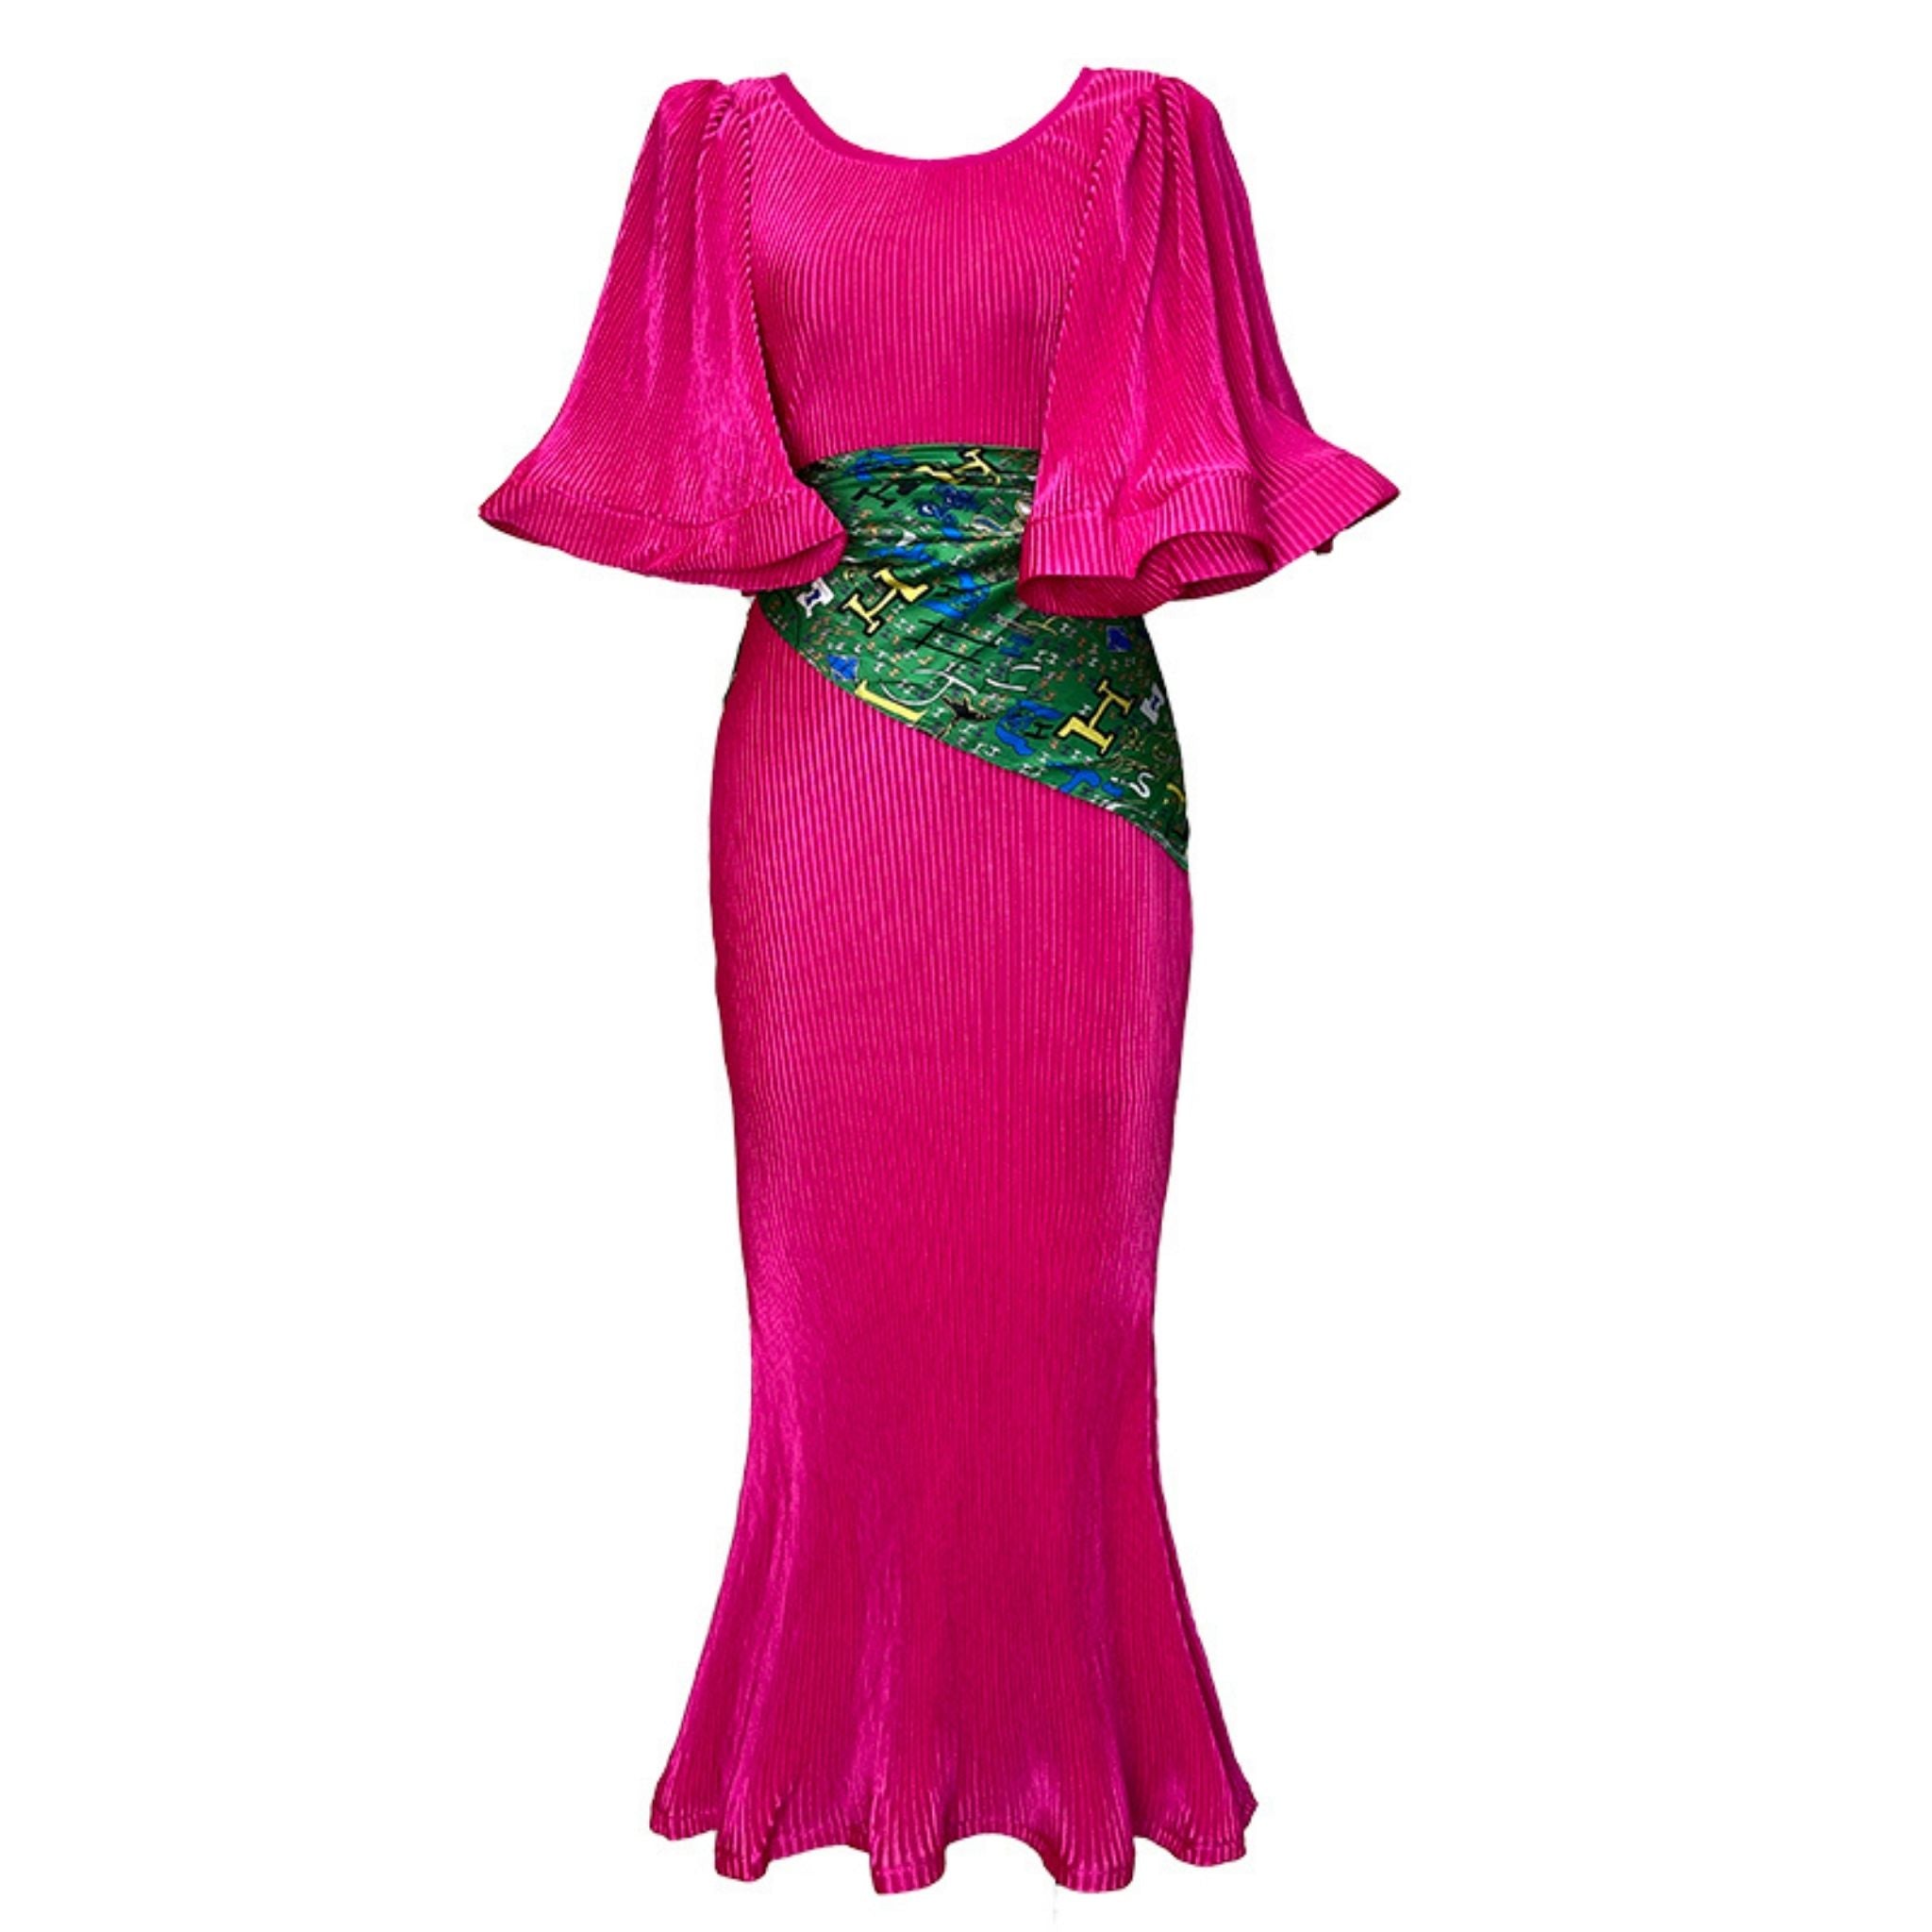 Pink maxi dress with butterfly sleeve.